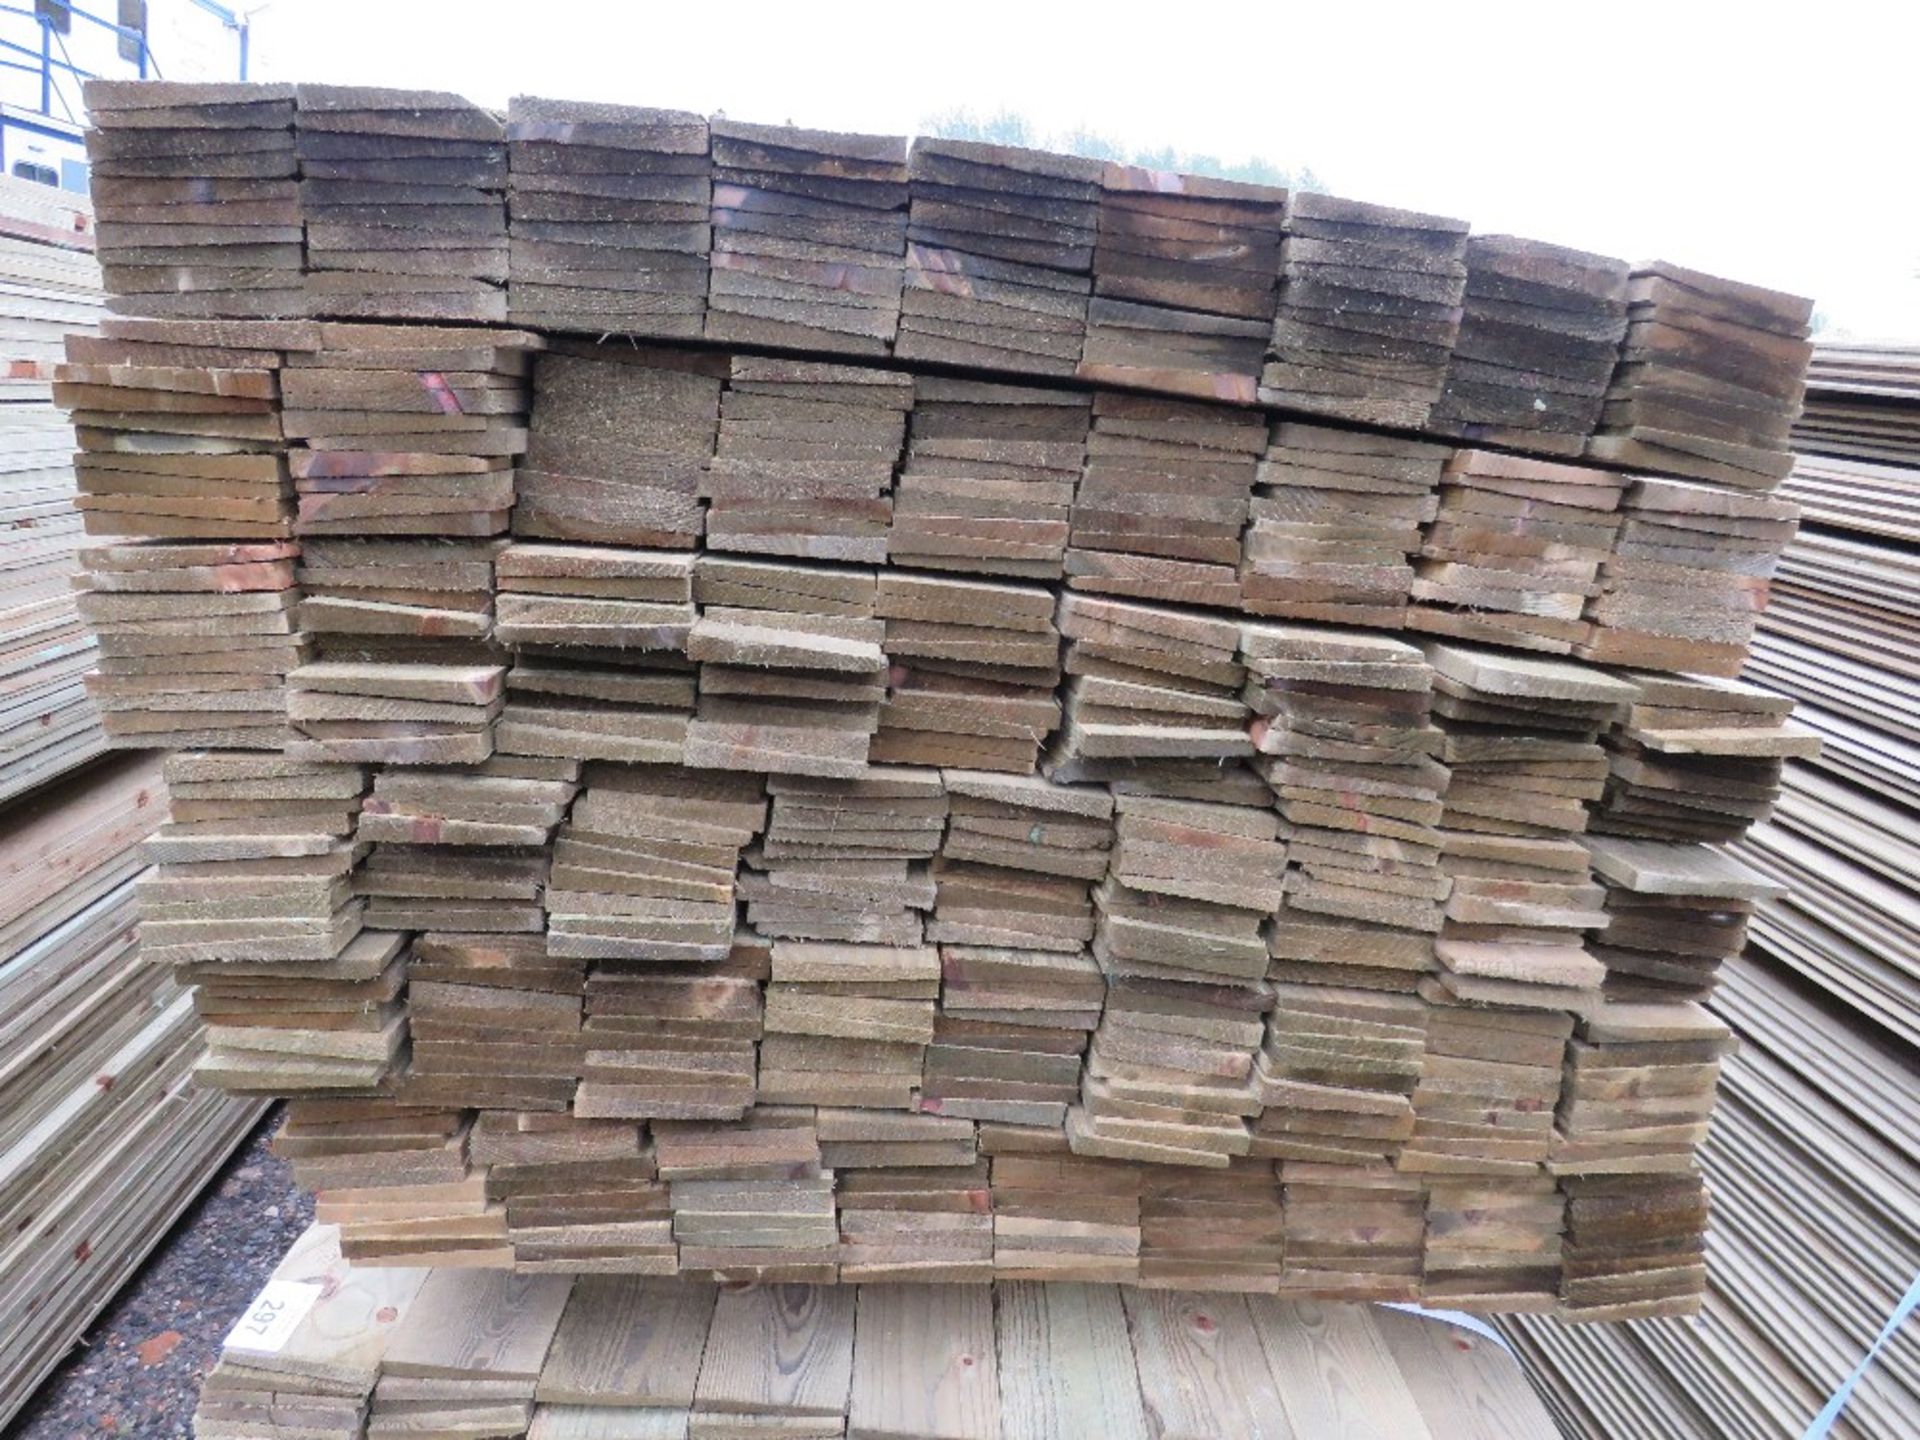 LARGE PACK OF TREATED FEATHER EDGE TIMBER CLADDING BOARDS, 1.80M LENGTH APPROX X 10CM WIDTH APPROX. - Image 2 of 3